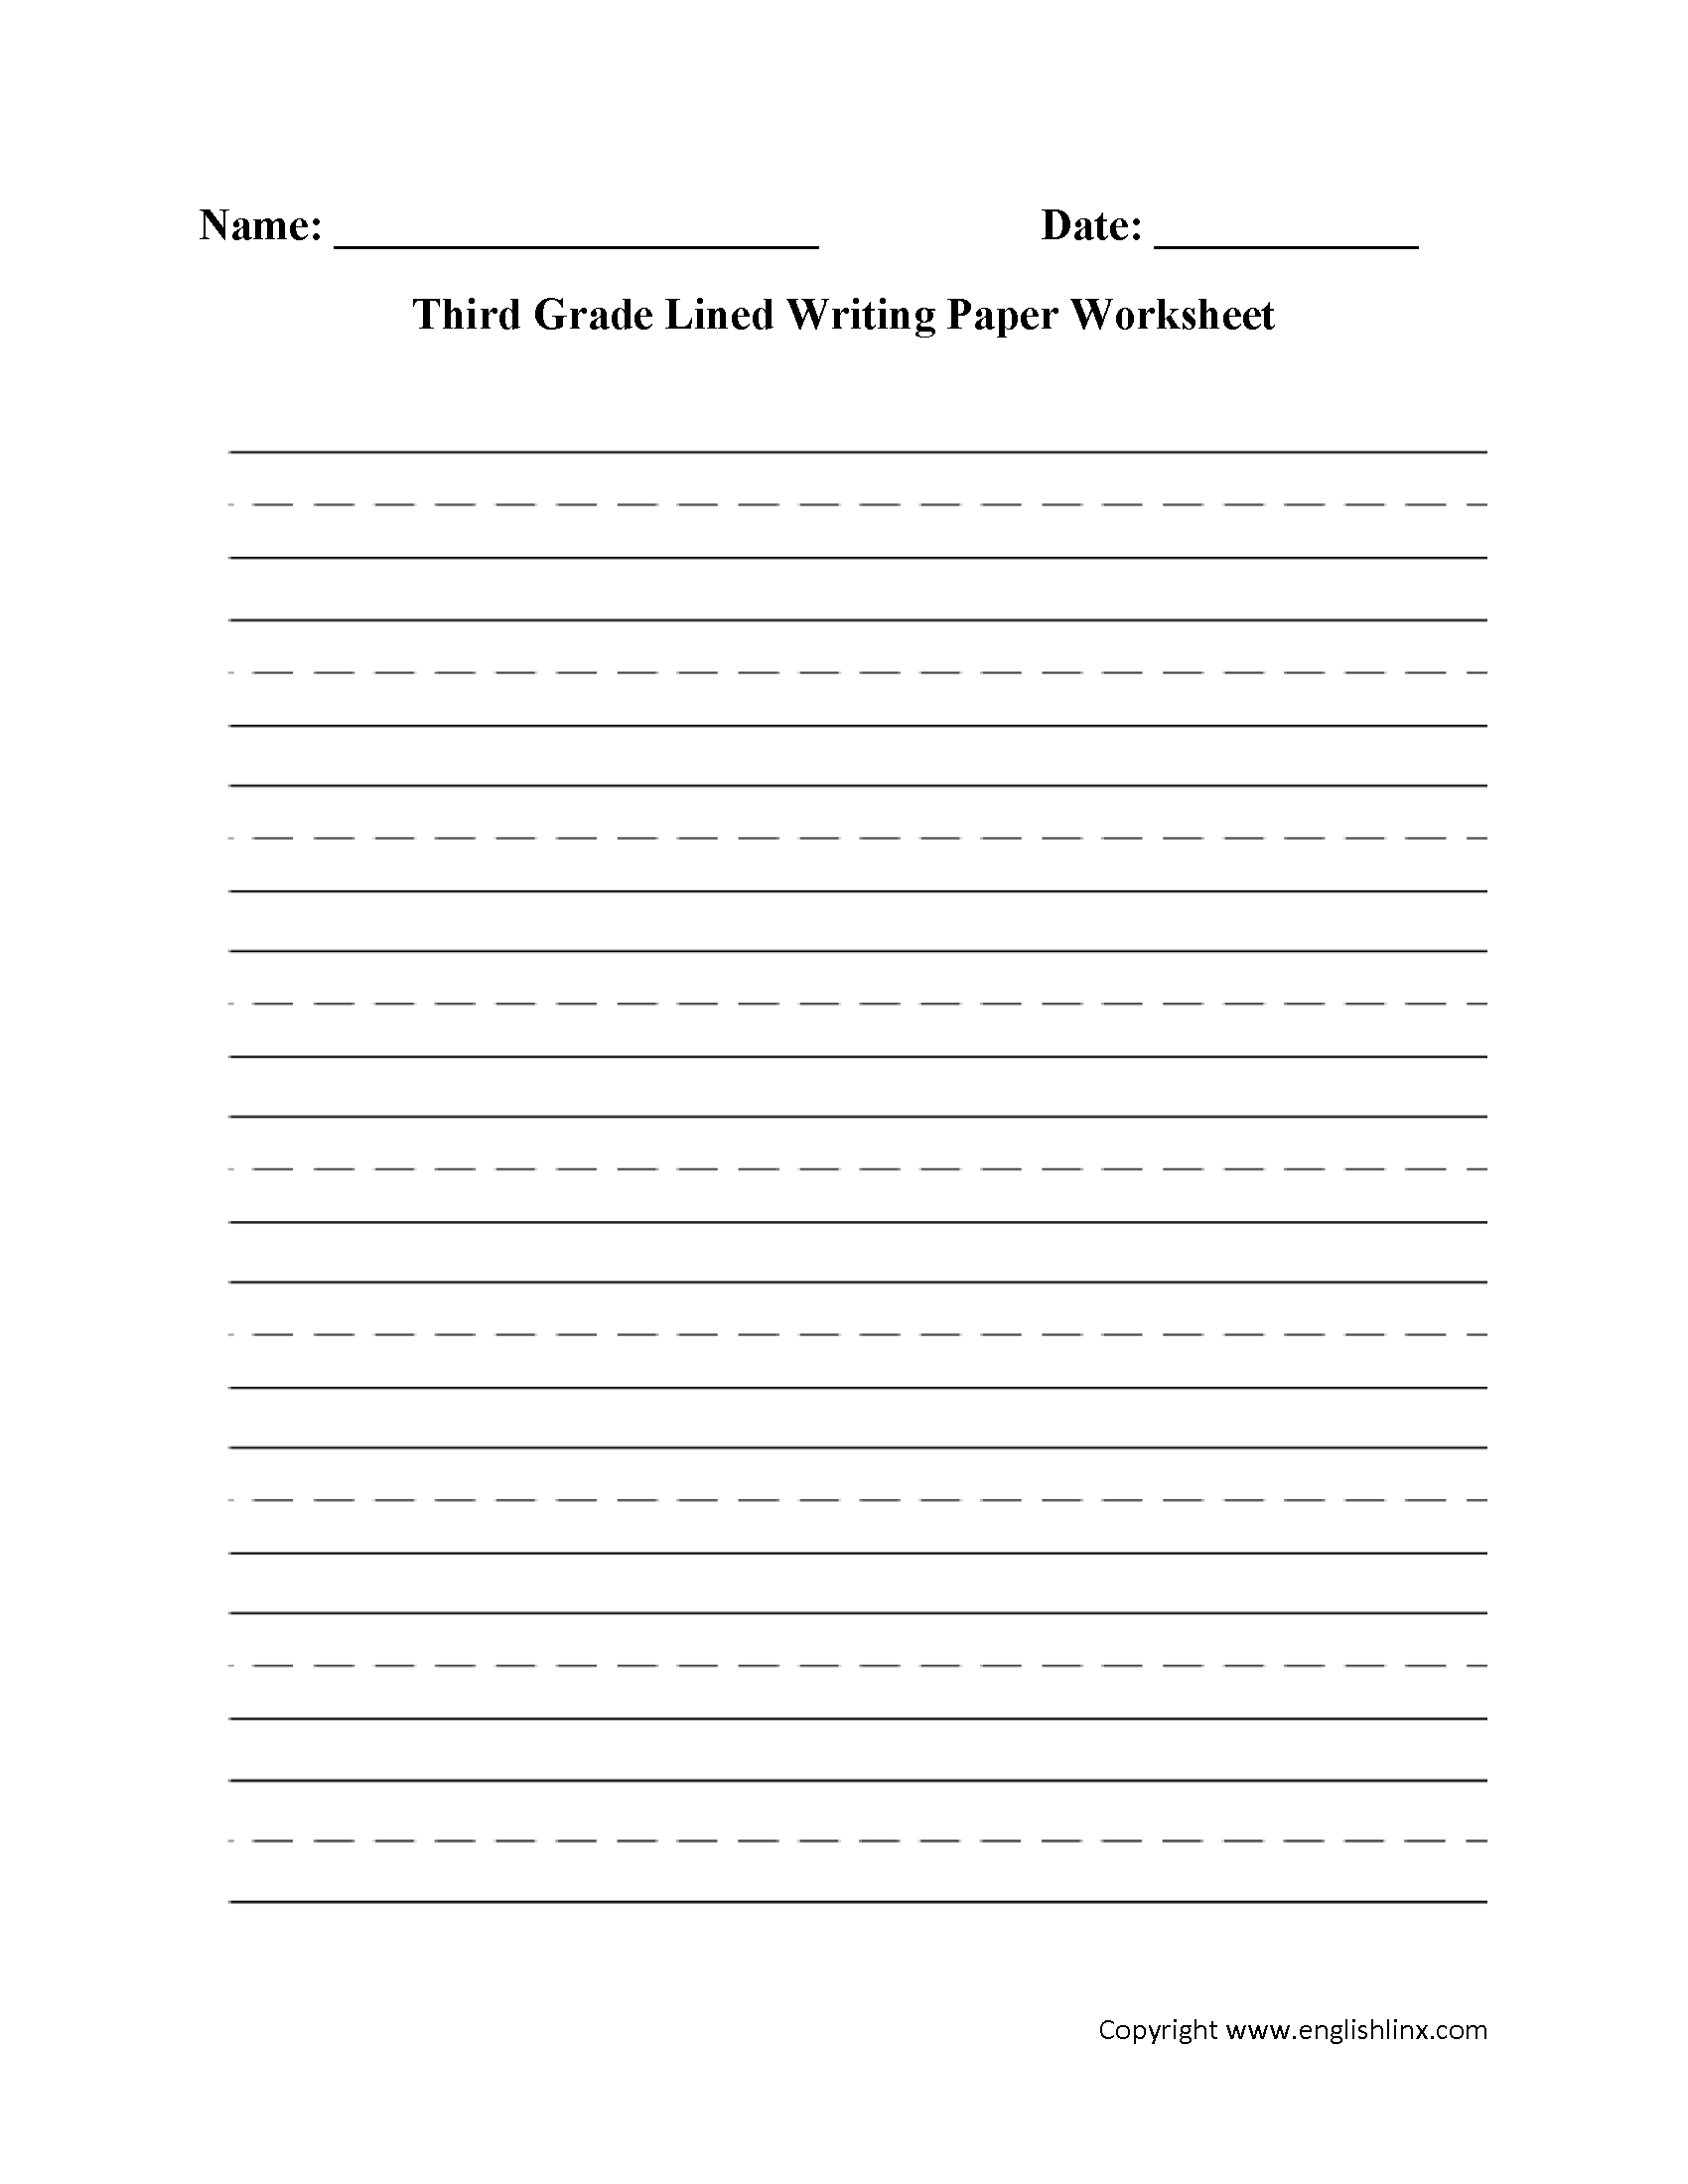 Writing Worksheets | Lined Writing Paper Worksheets - Free Printable Writing Paper